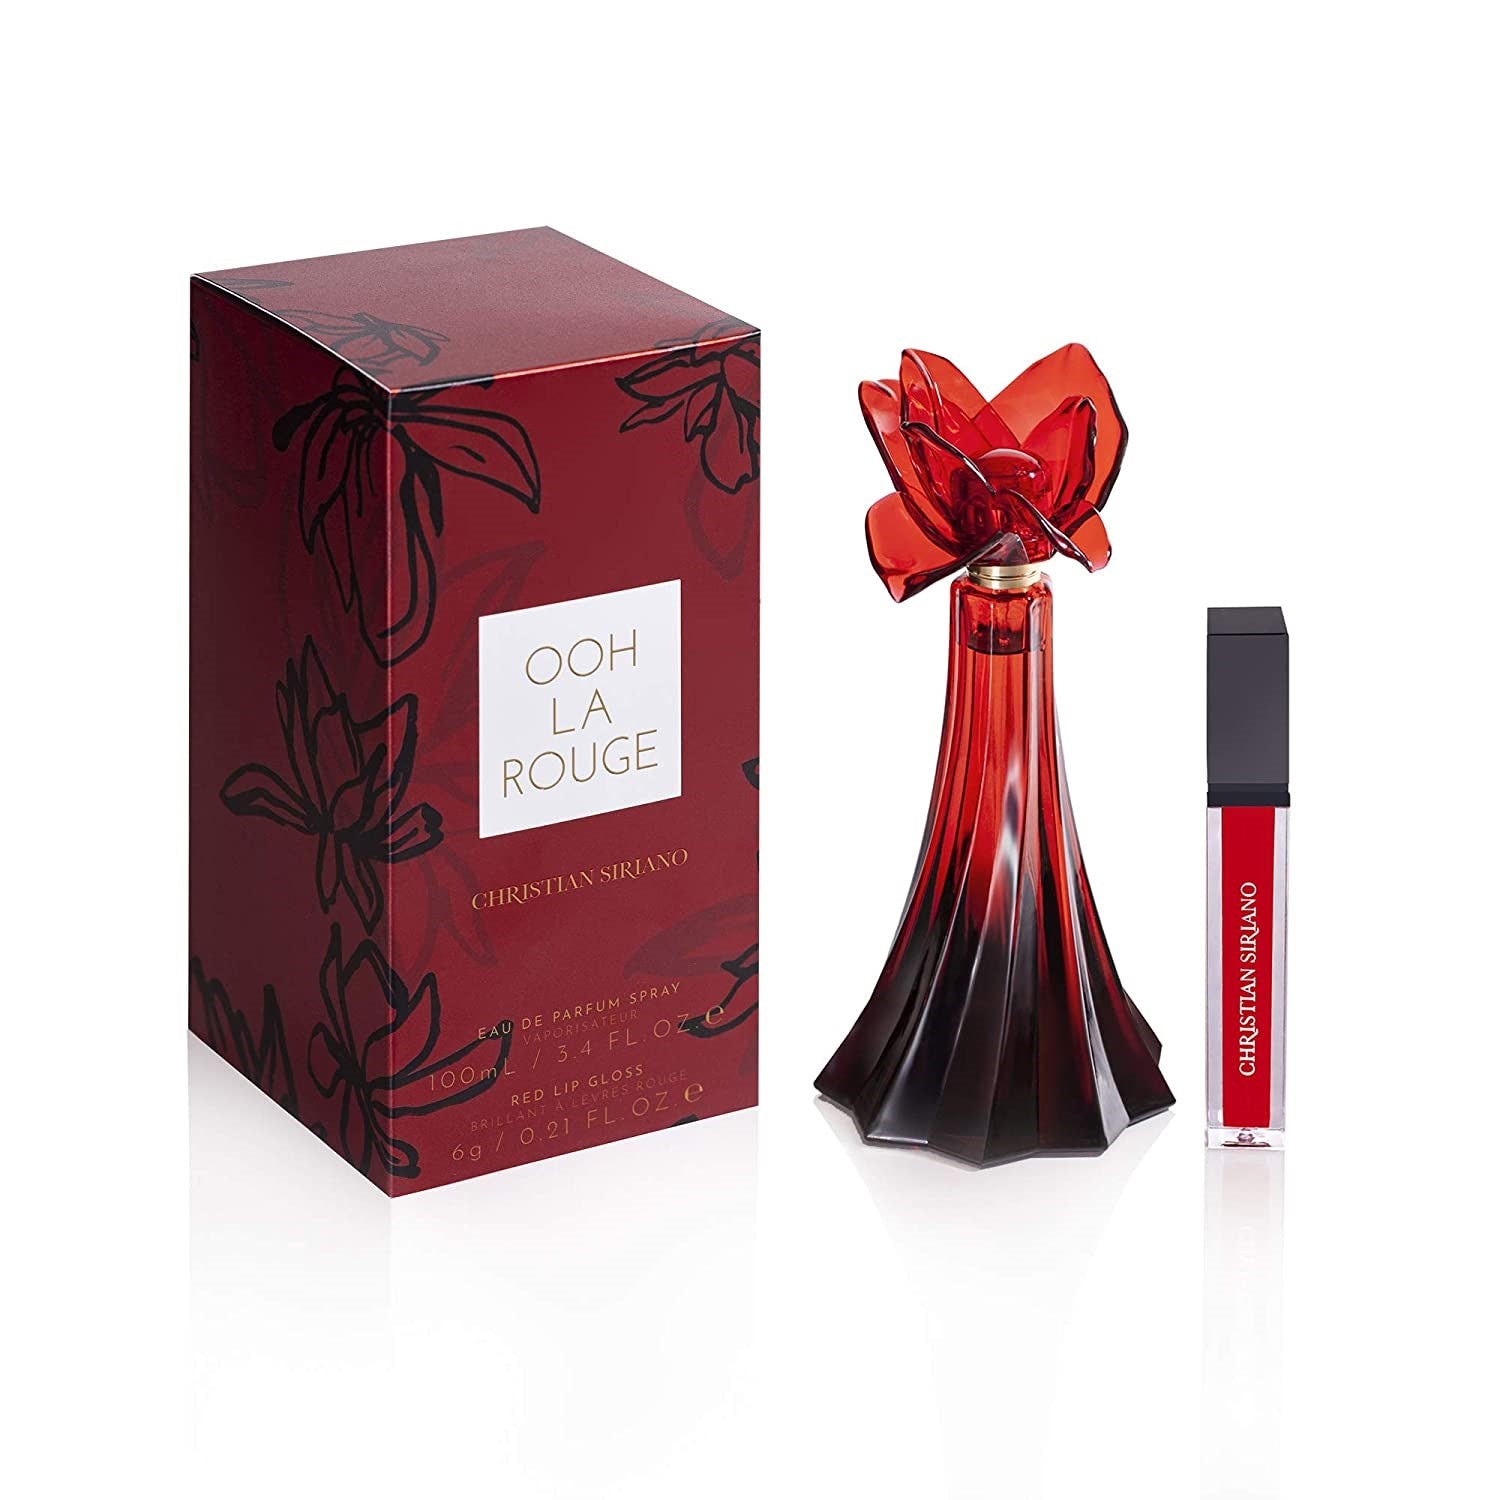 Ooh La Rouge Eau de Parfum Spray for Women by Christian Siriano 3.4 oz with box Click to open in modal